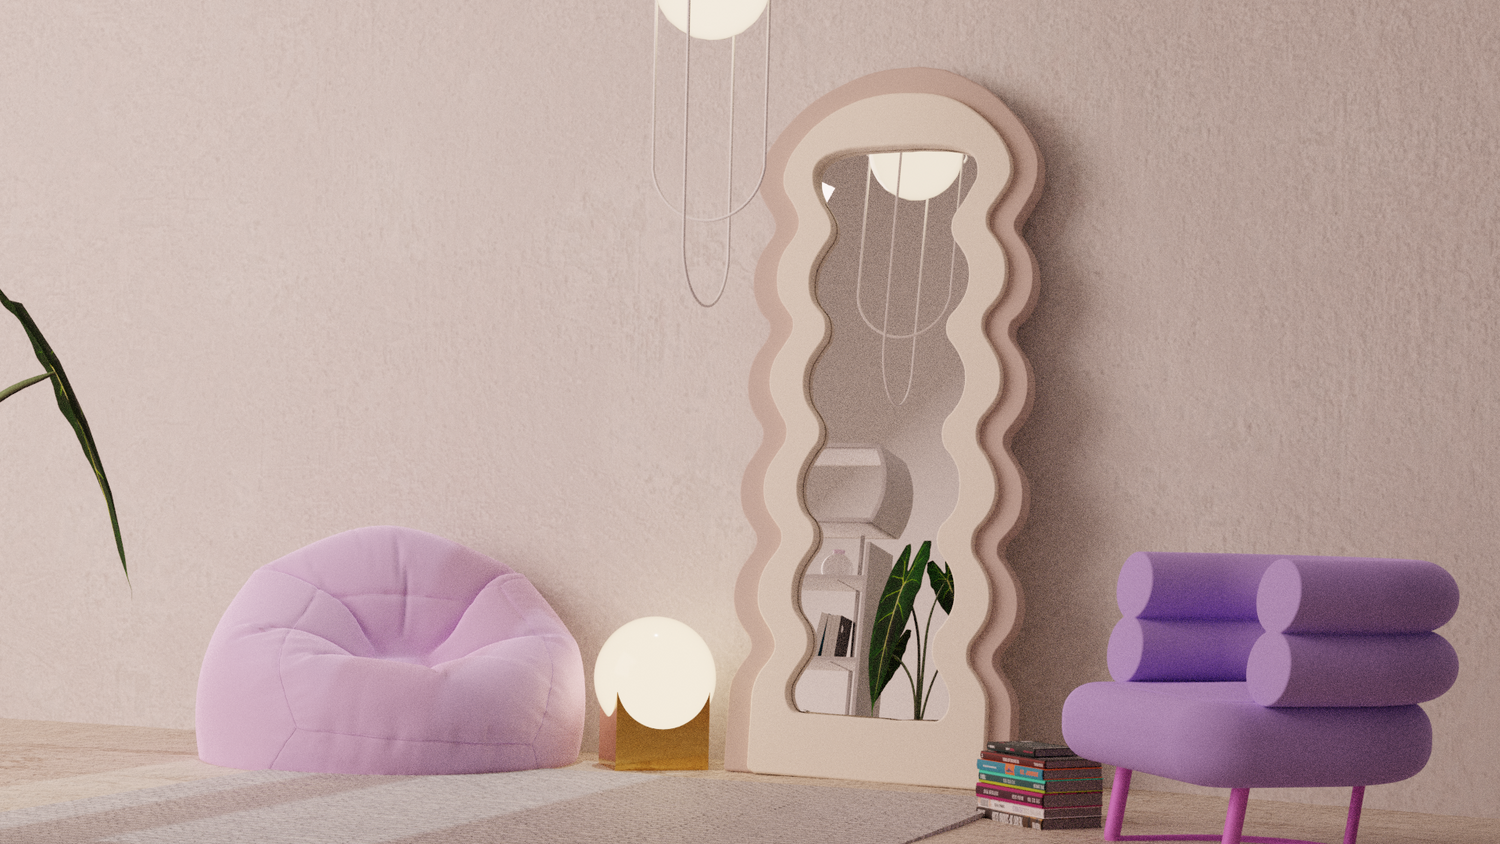 Tall wavy mirror in white. Eclectic decor. Floor globe lamp and lavender bean bag chair.